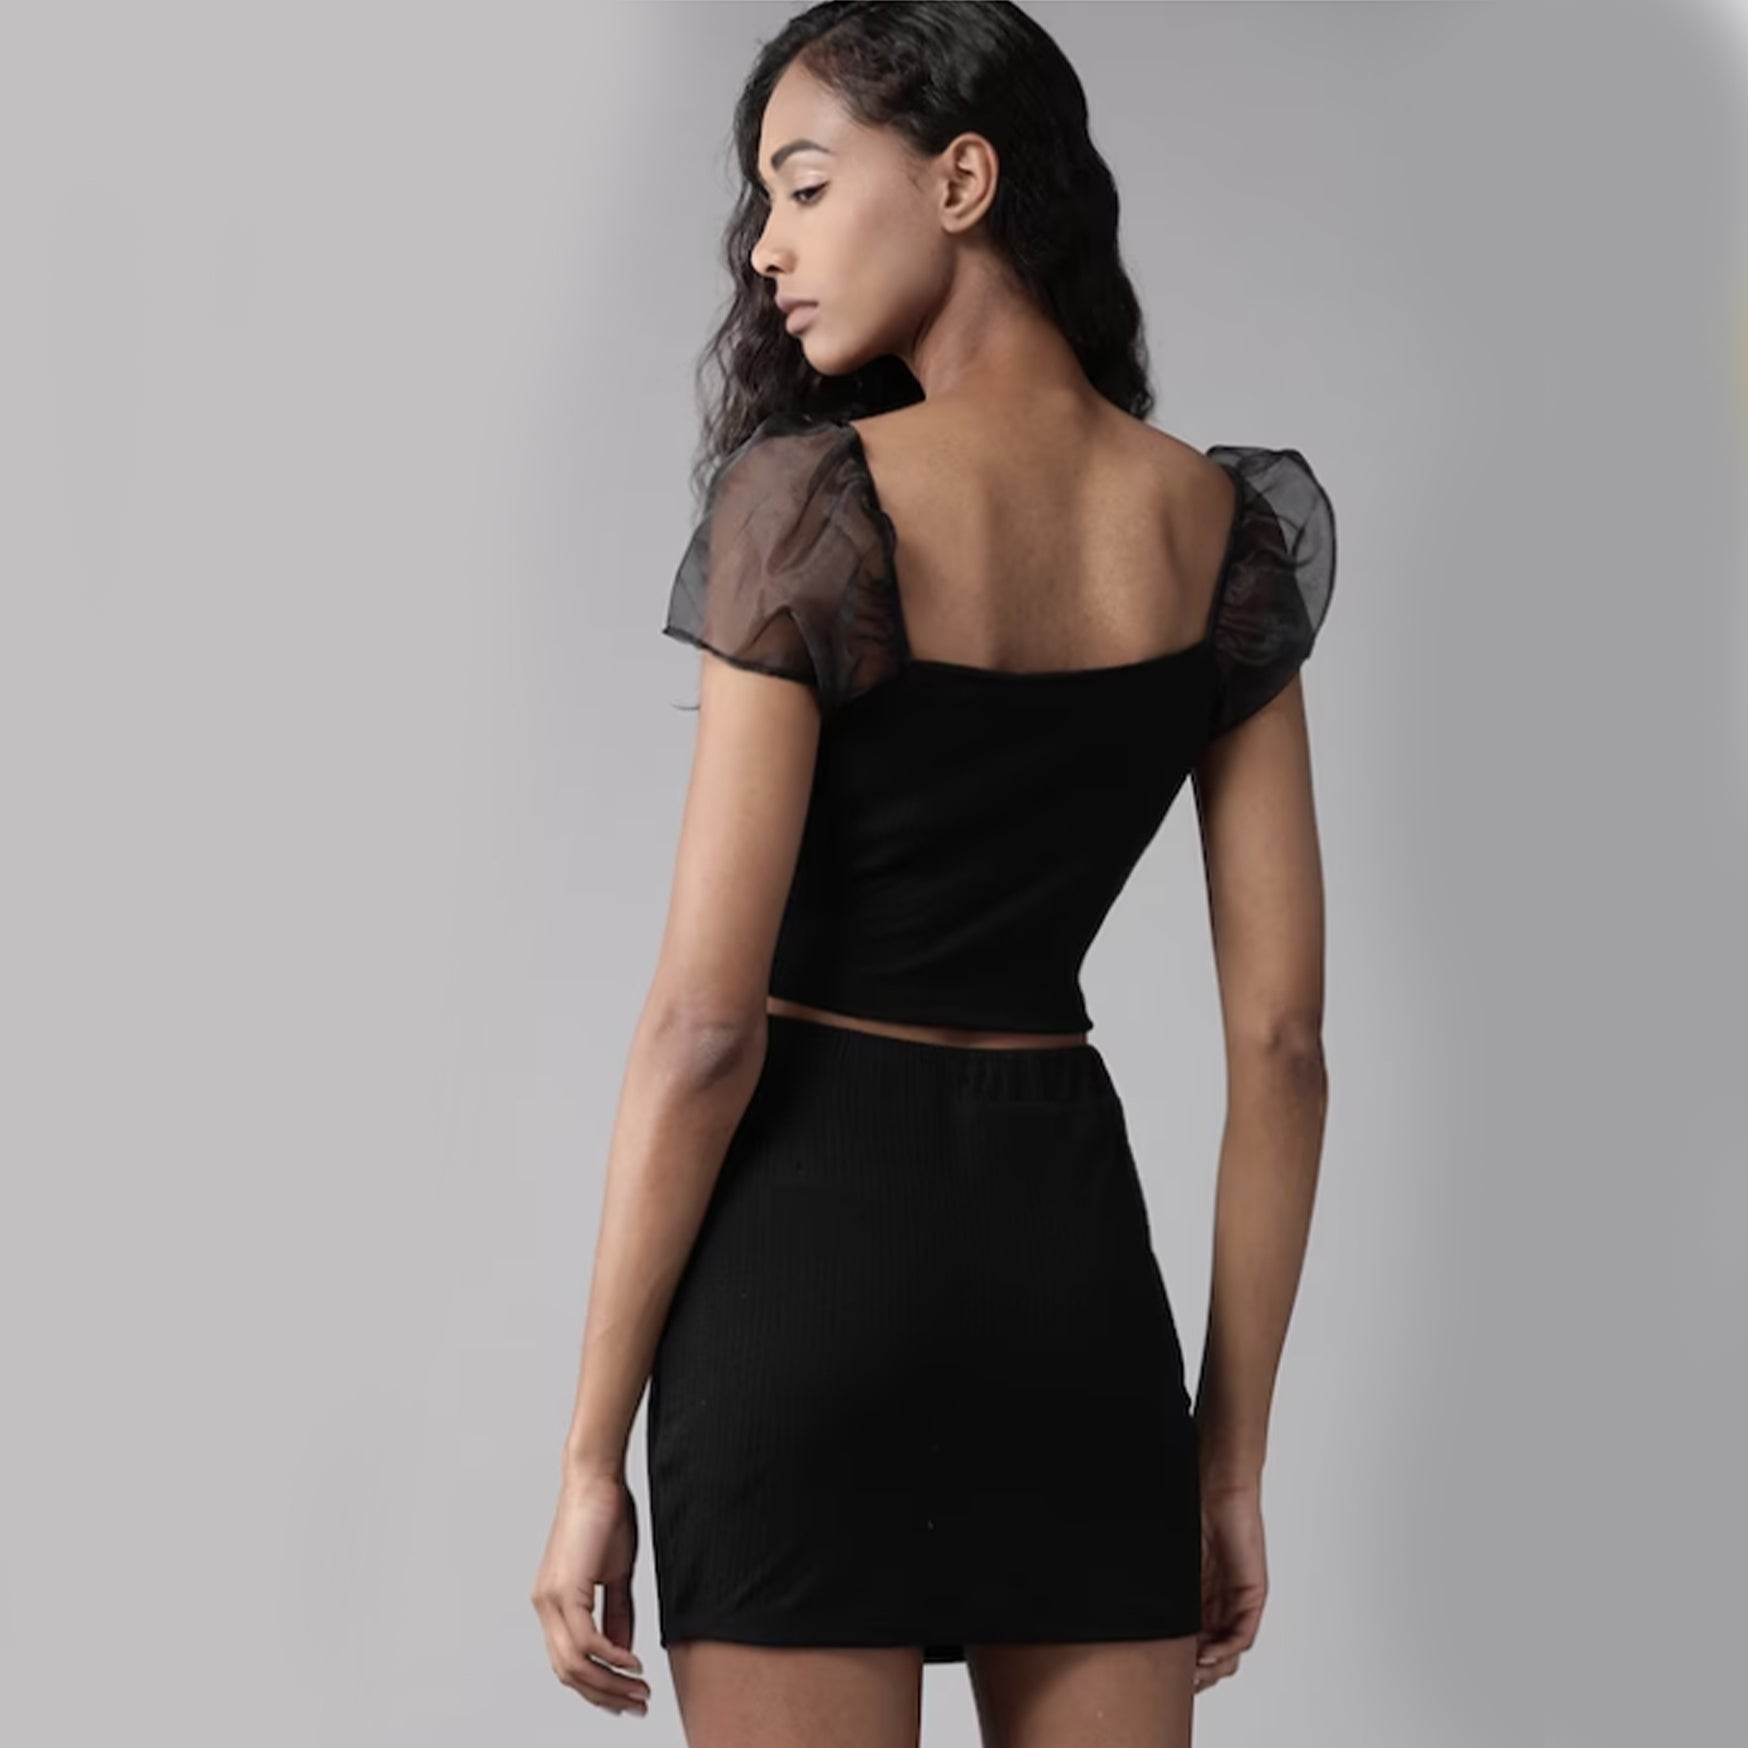 Women Stylish Black Solid Top with Skirt